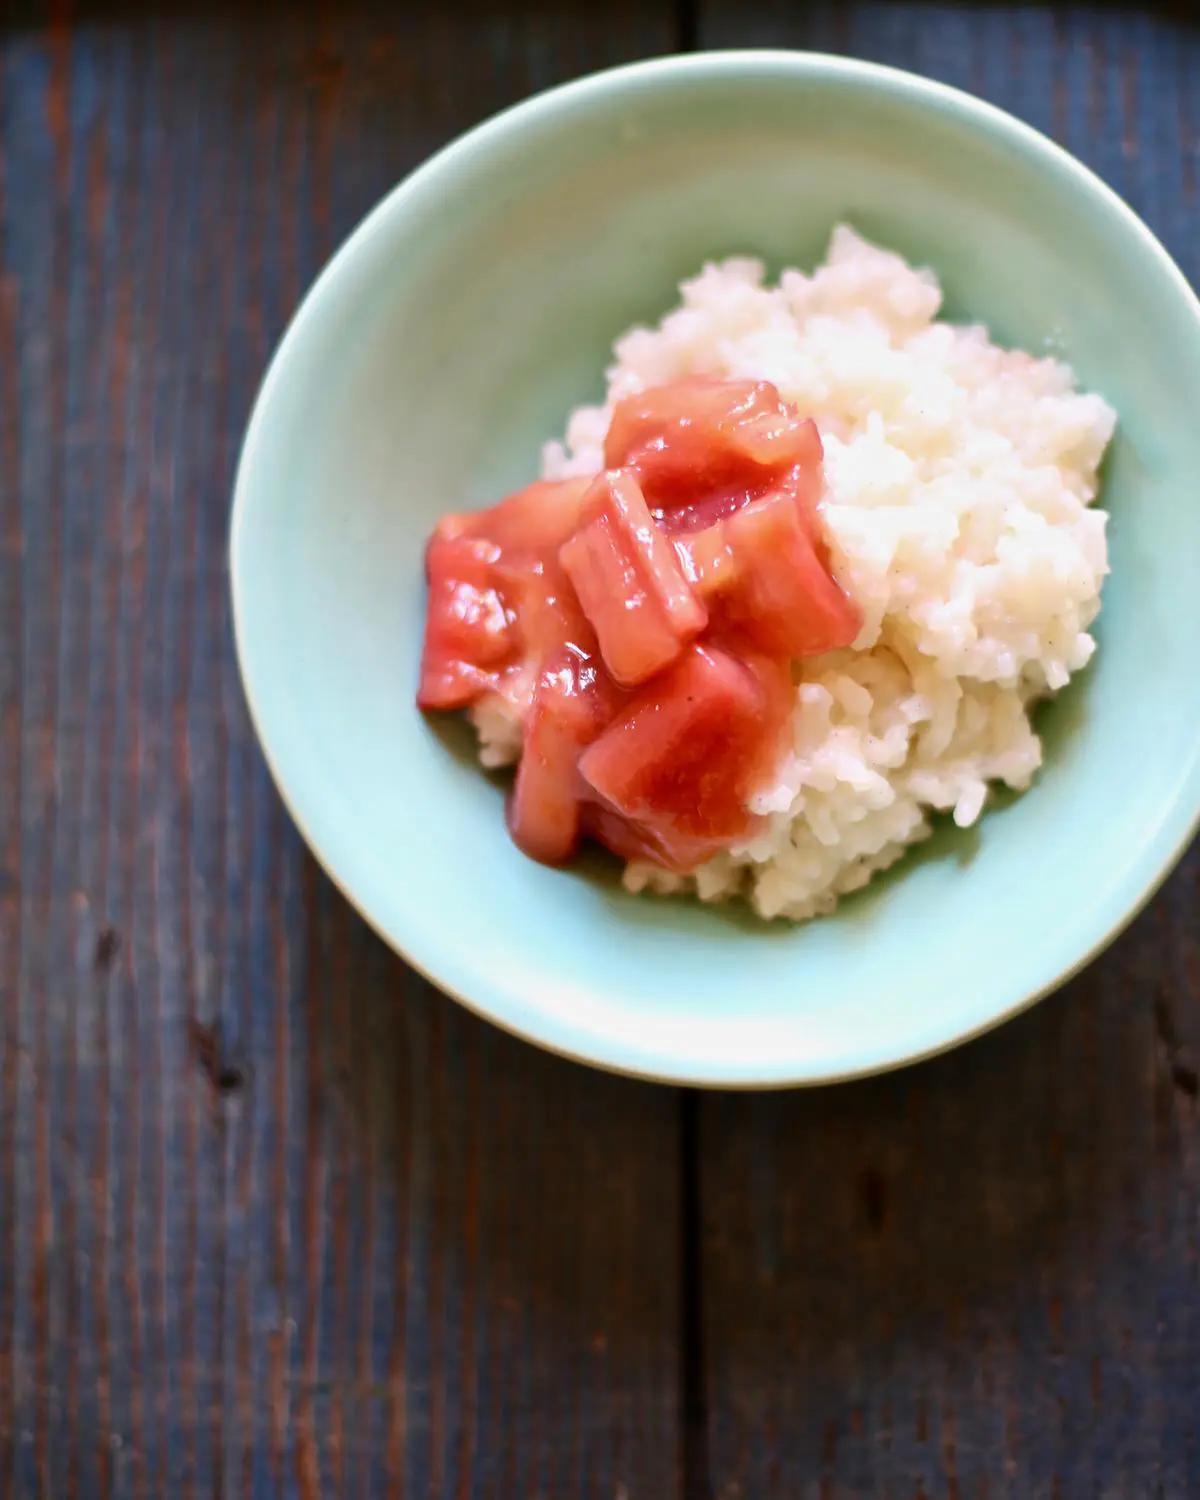 rice pudding with rhubarb in a small blue bowl on a table